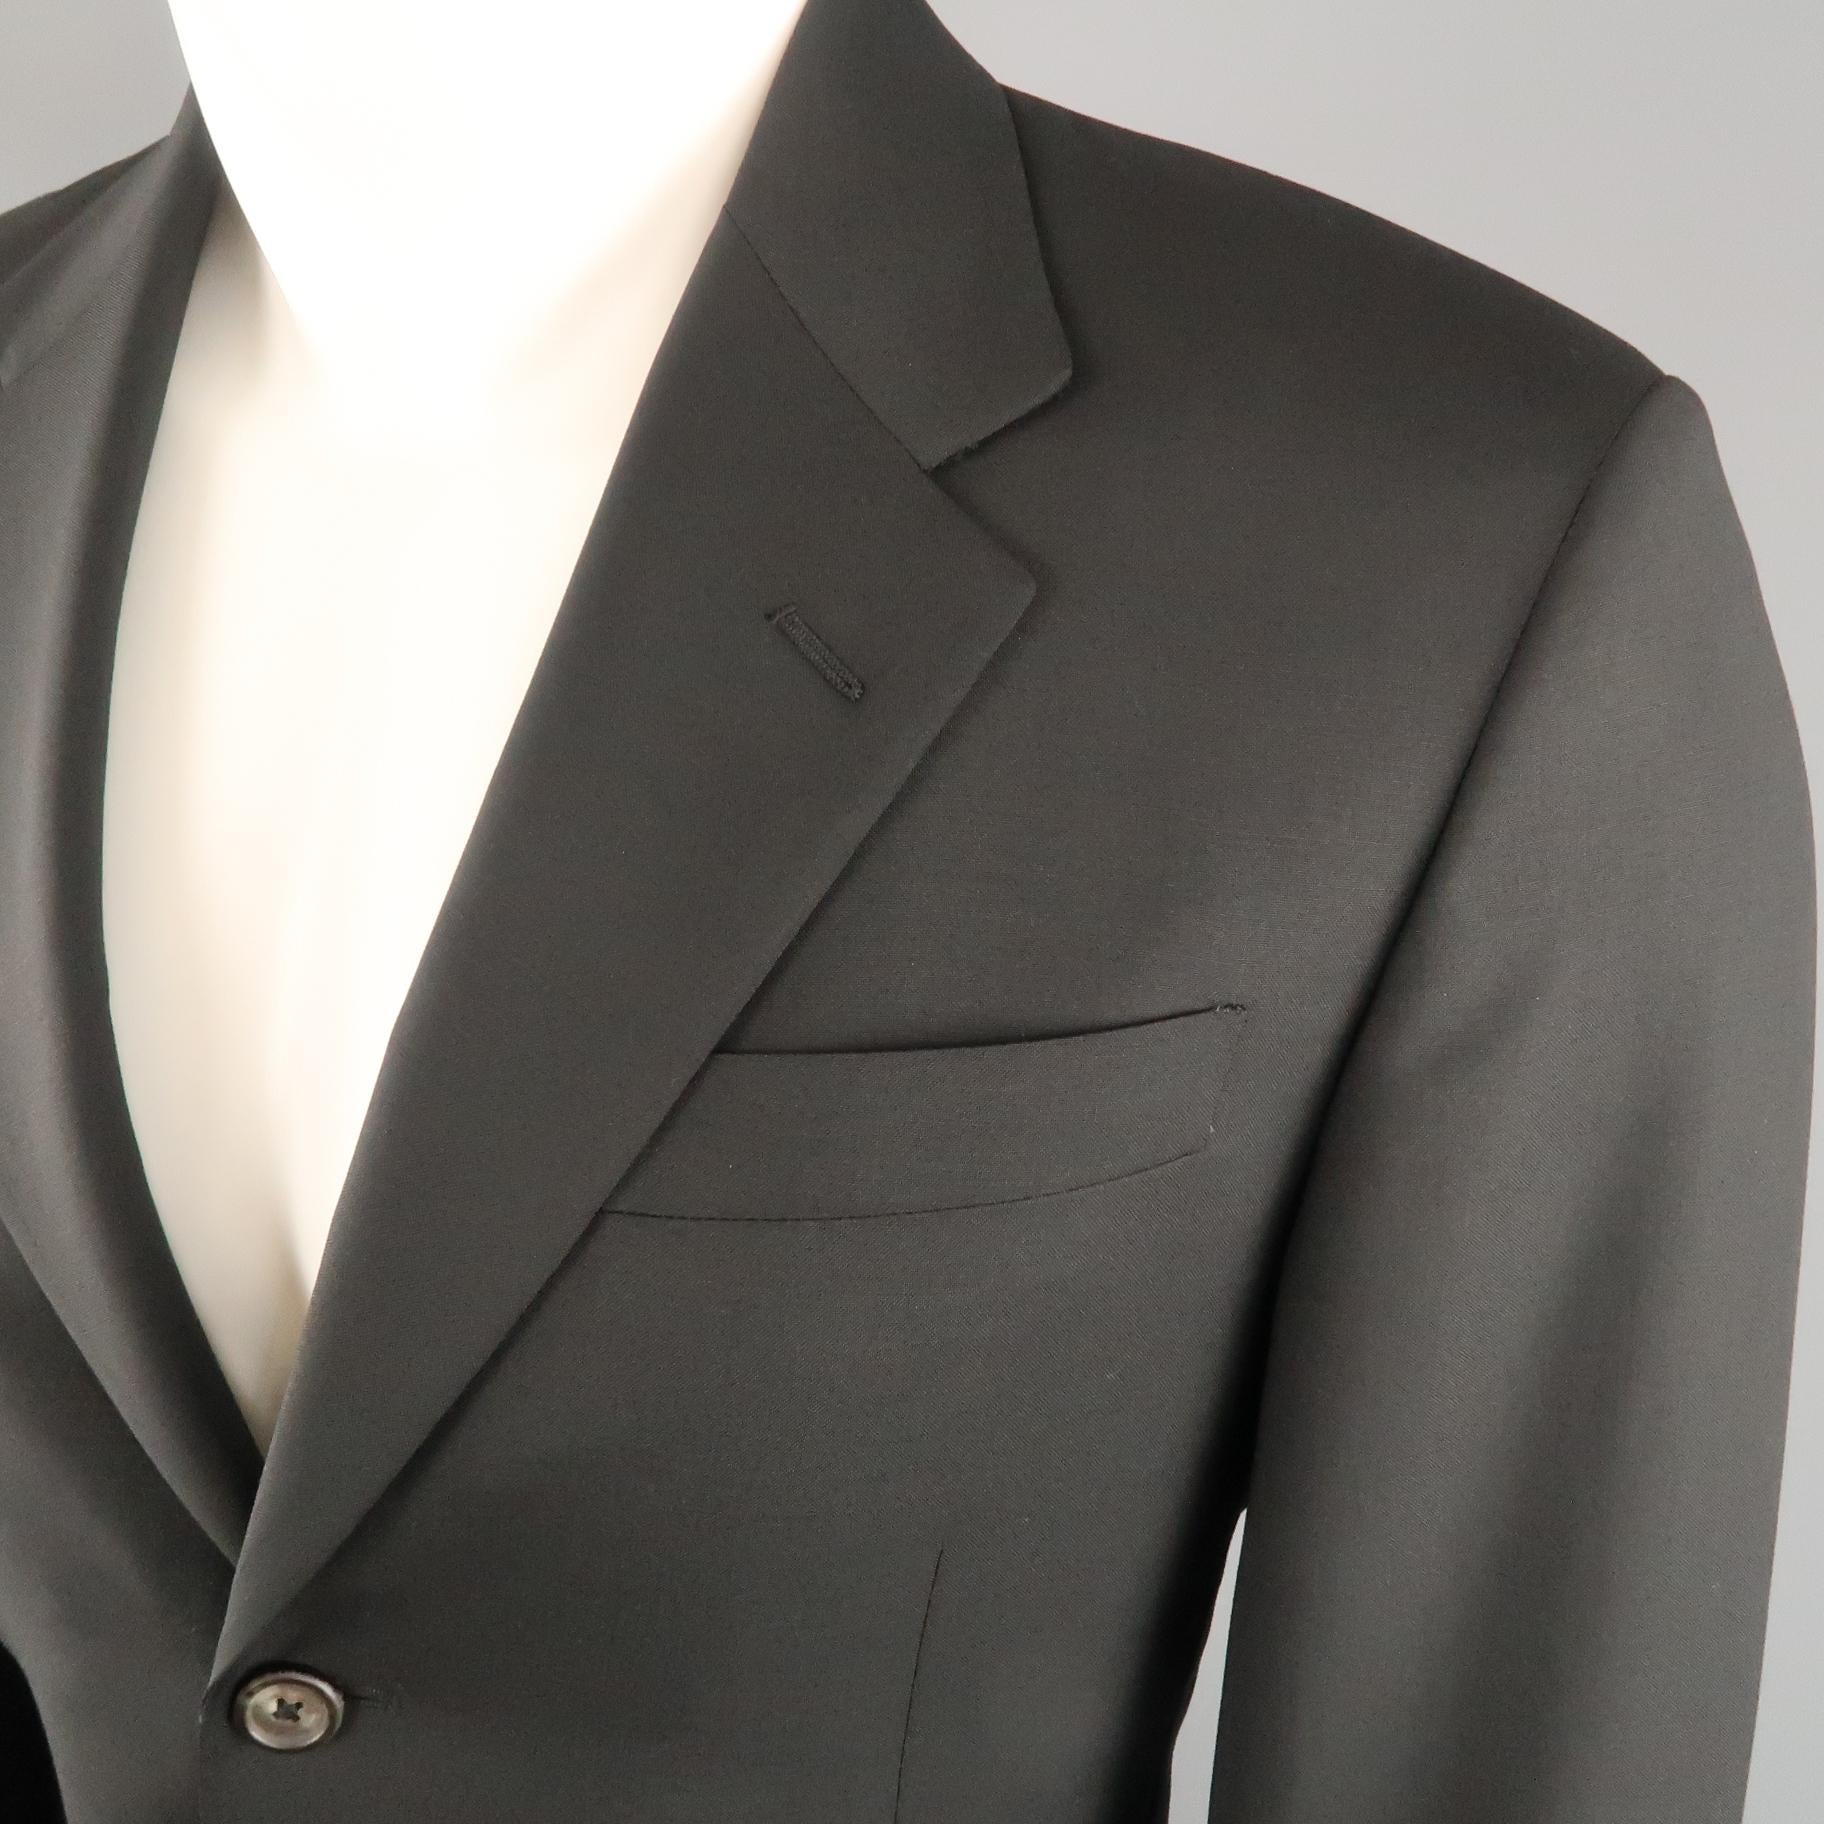 PRADA sport coat comes in black wool with a notch lapel, single breasted,  three button front, and flap pockets. Made in Italy.
 
Excellent Pre-Owned Condition.
Marked: IT 48
 
Measurements:
 
Shoulder: 17.5 in.
Chest: 40 in.
Sleeve: 26 in.
Length: